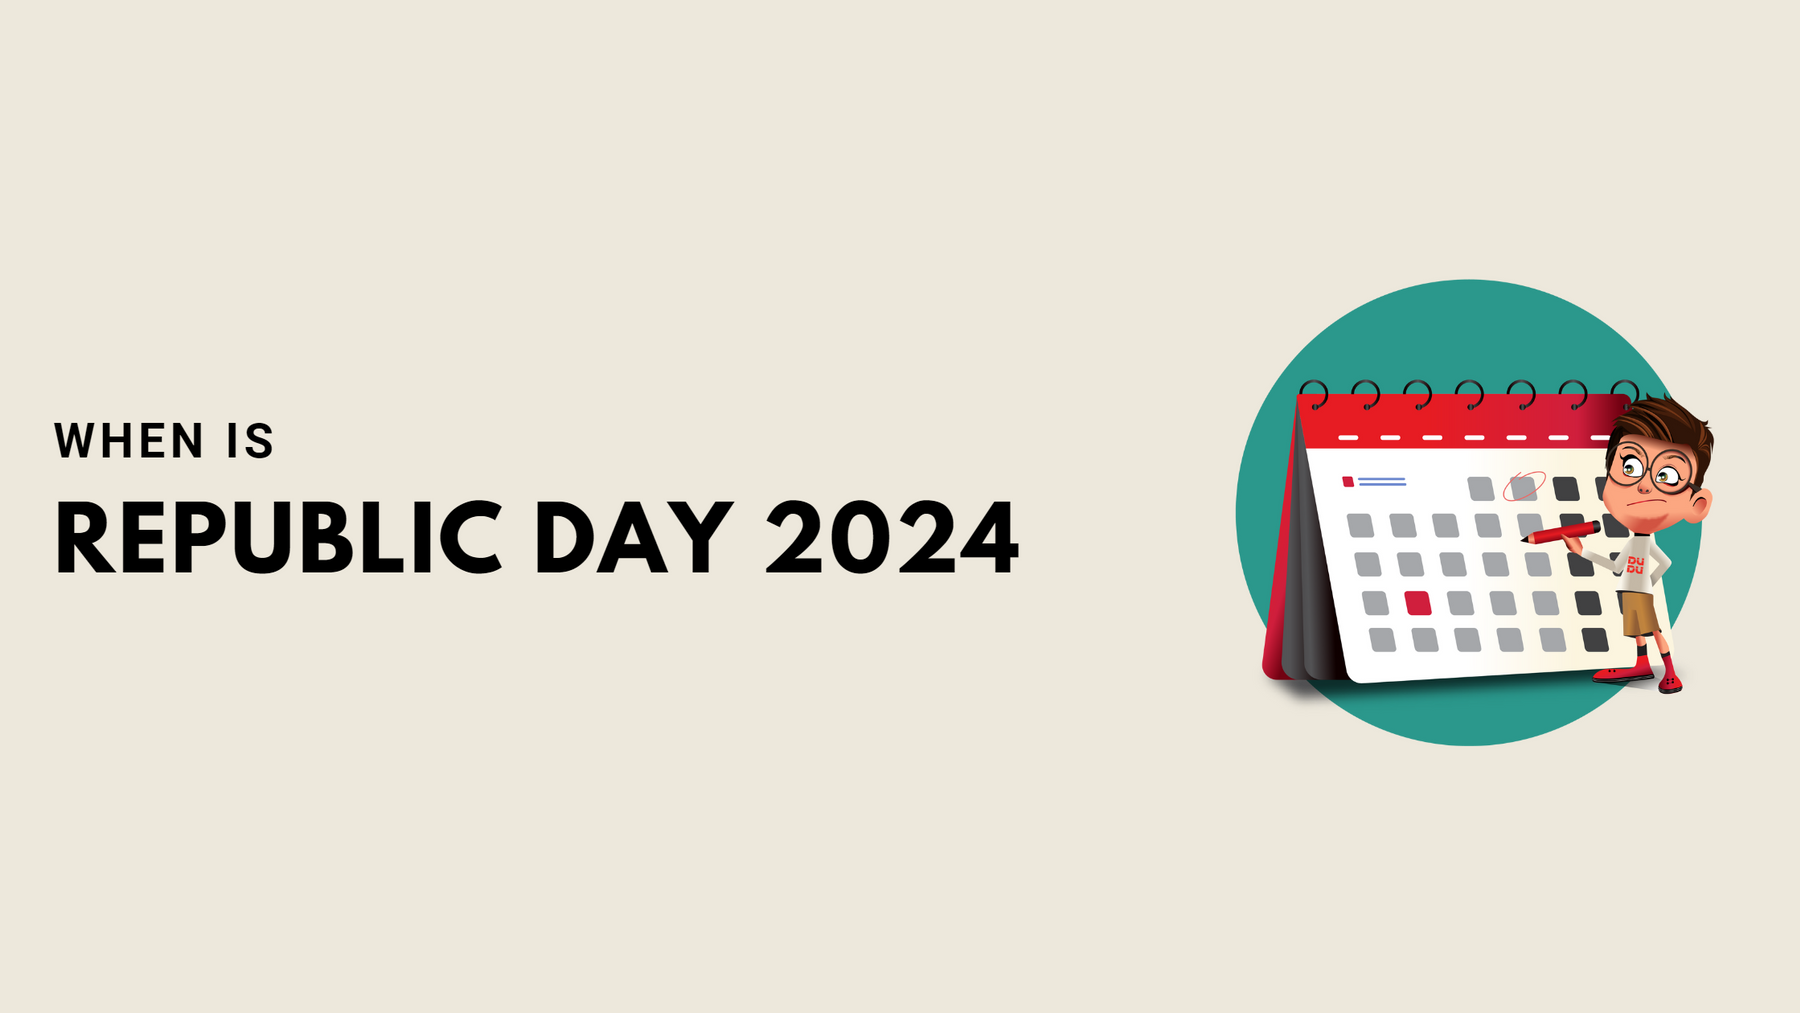 When Is Republic Day 2024?